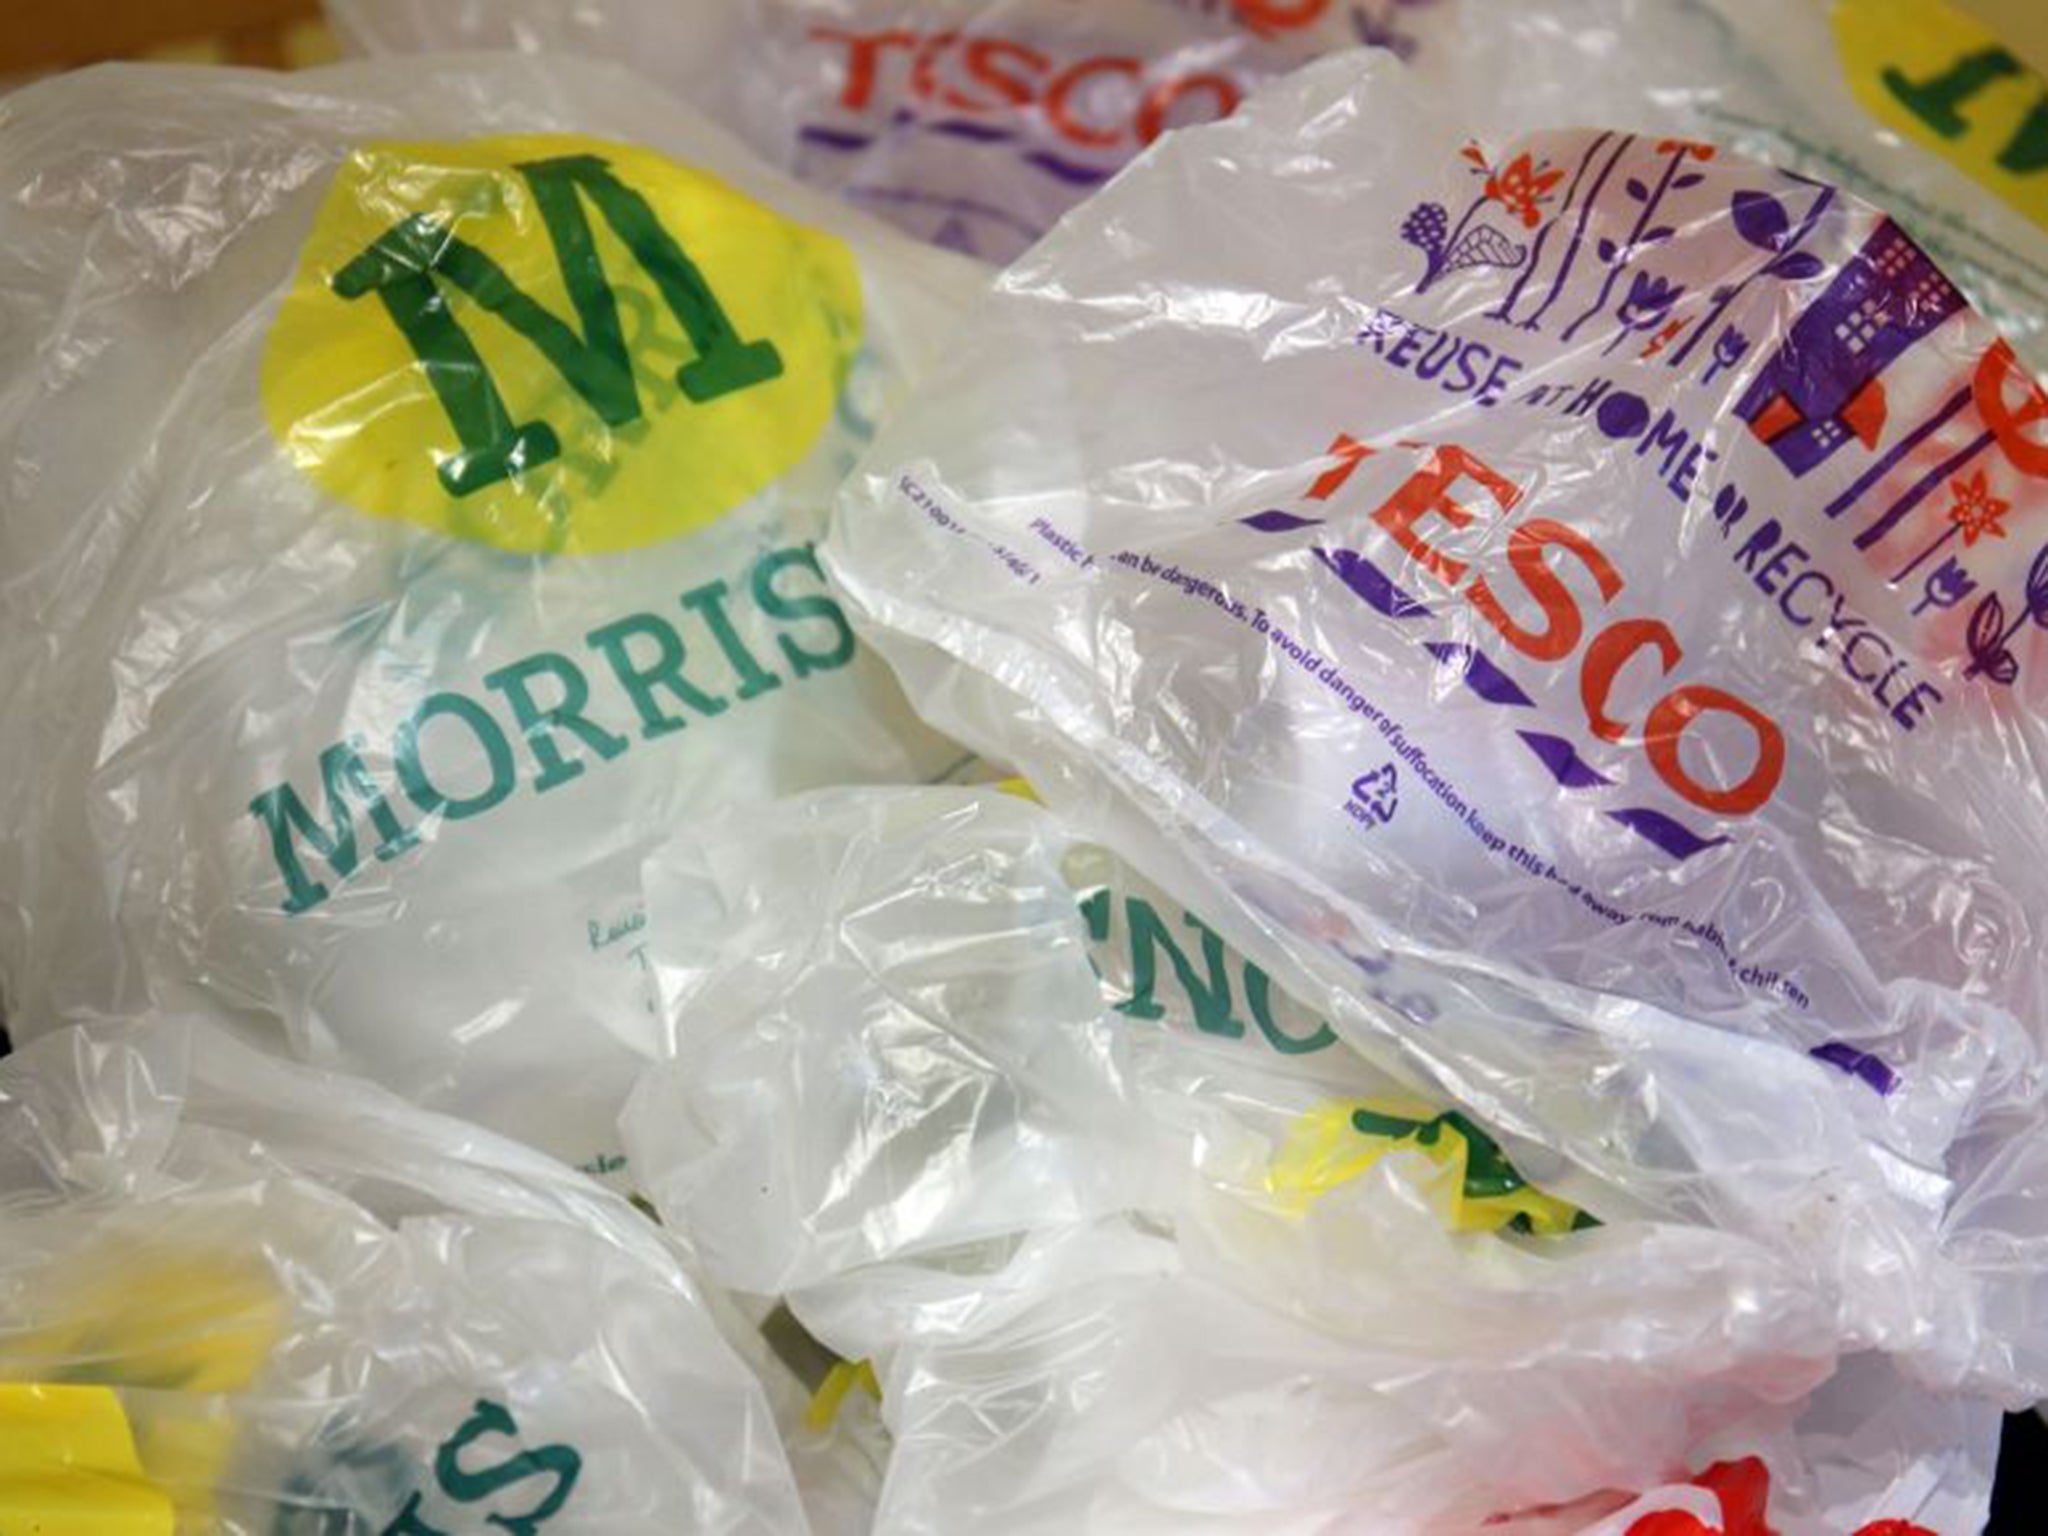 Michael Gove said the levy has cut plastic bag use by 90 per cent since October 2015